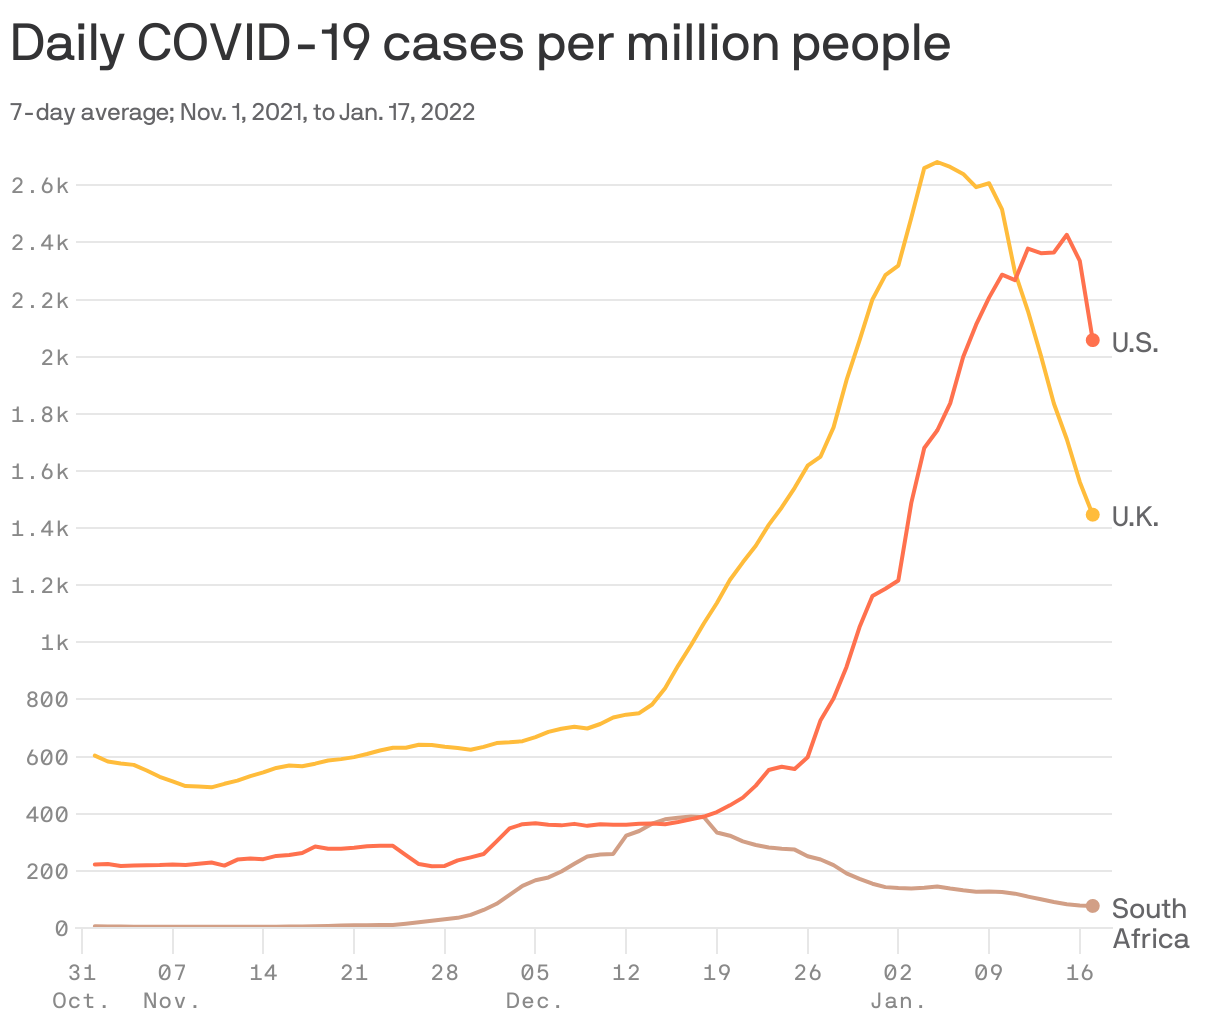 Daily COVID-19 cases per million people